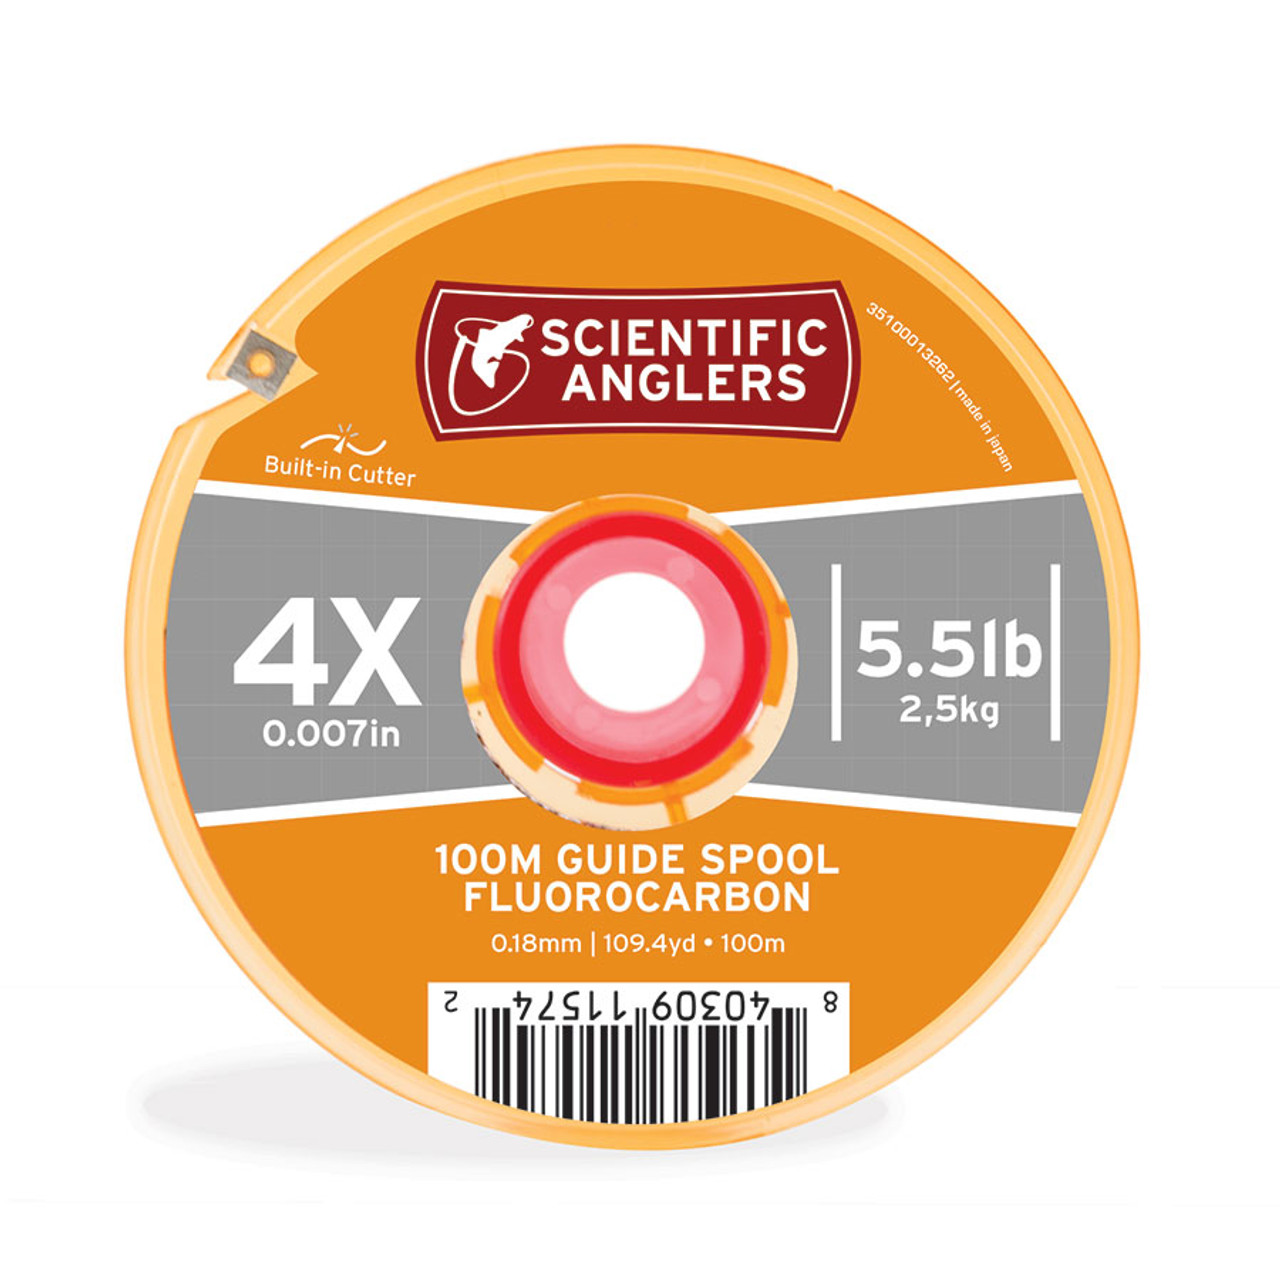 Scientific Anglers Fluorocarbon Tippet 100M Guide Spool - Ed's Fly